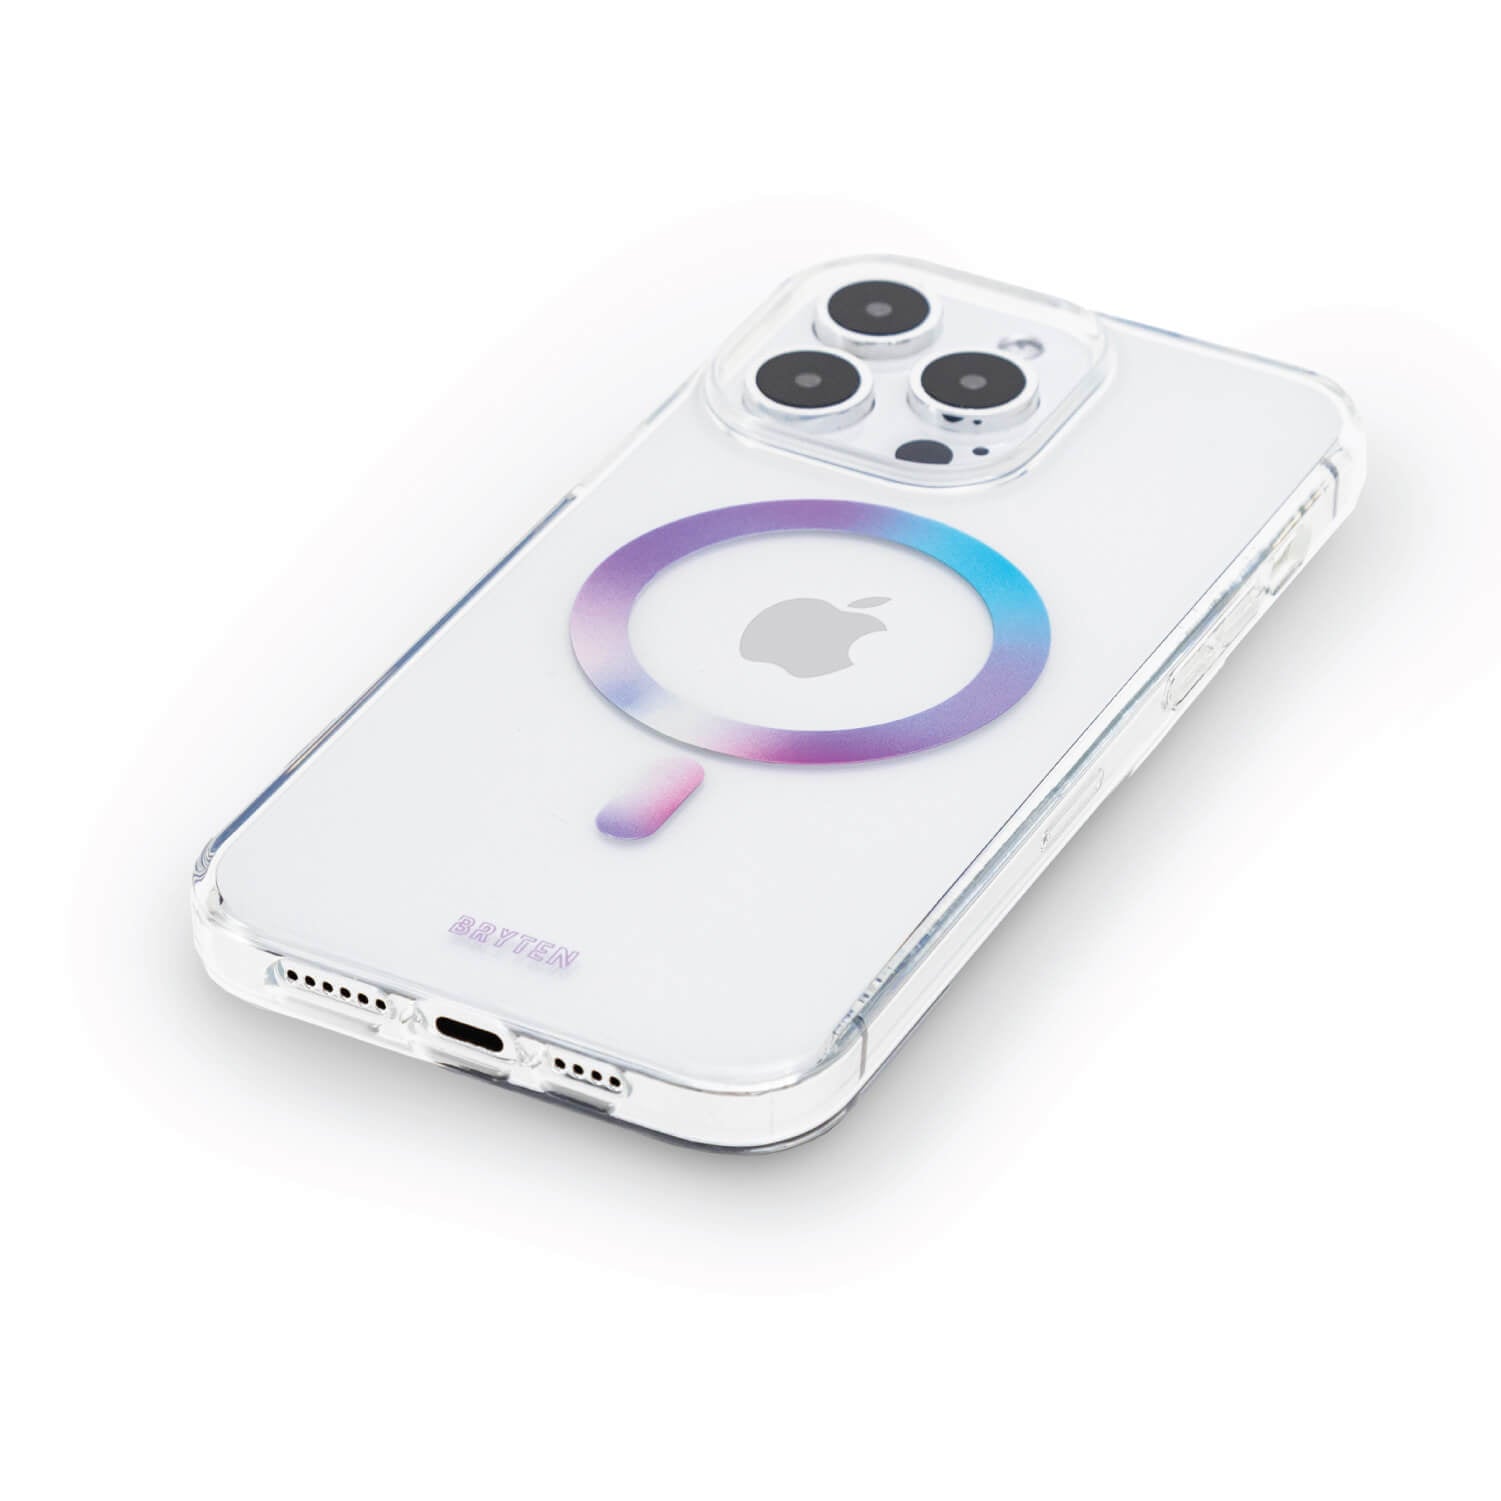 A clear Bryten case with a rainbow colored logo on it, designed for wireless charging compatibility with MagFx and MagSafe charger.